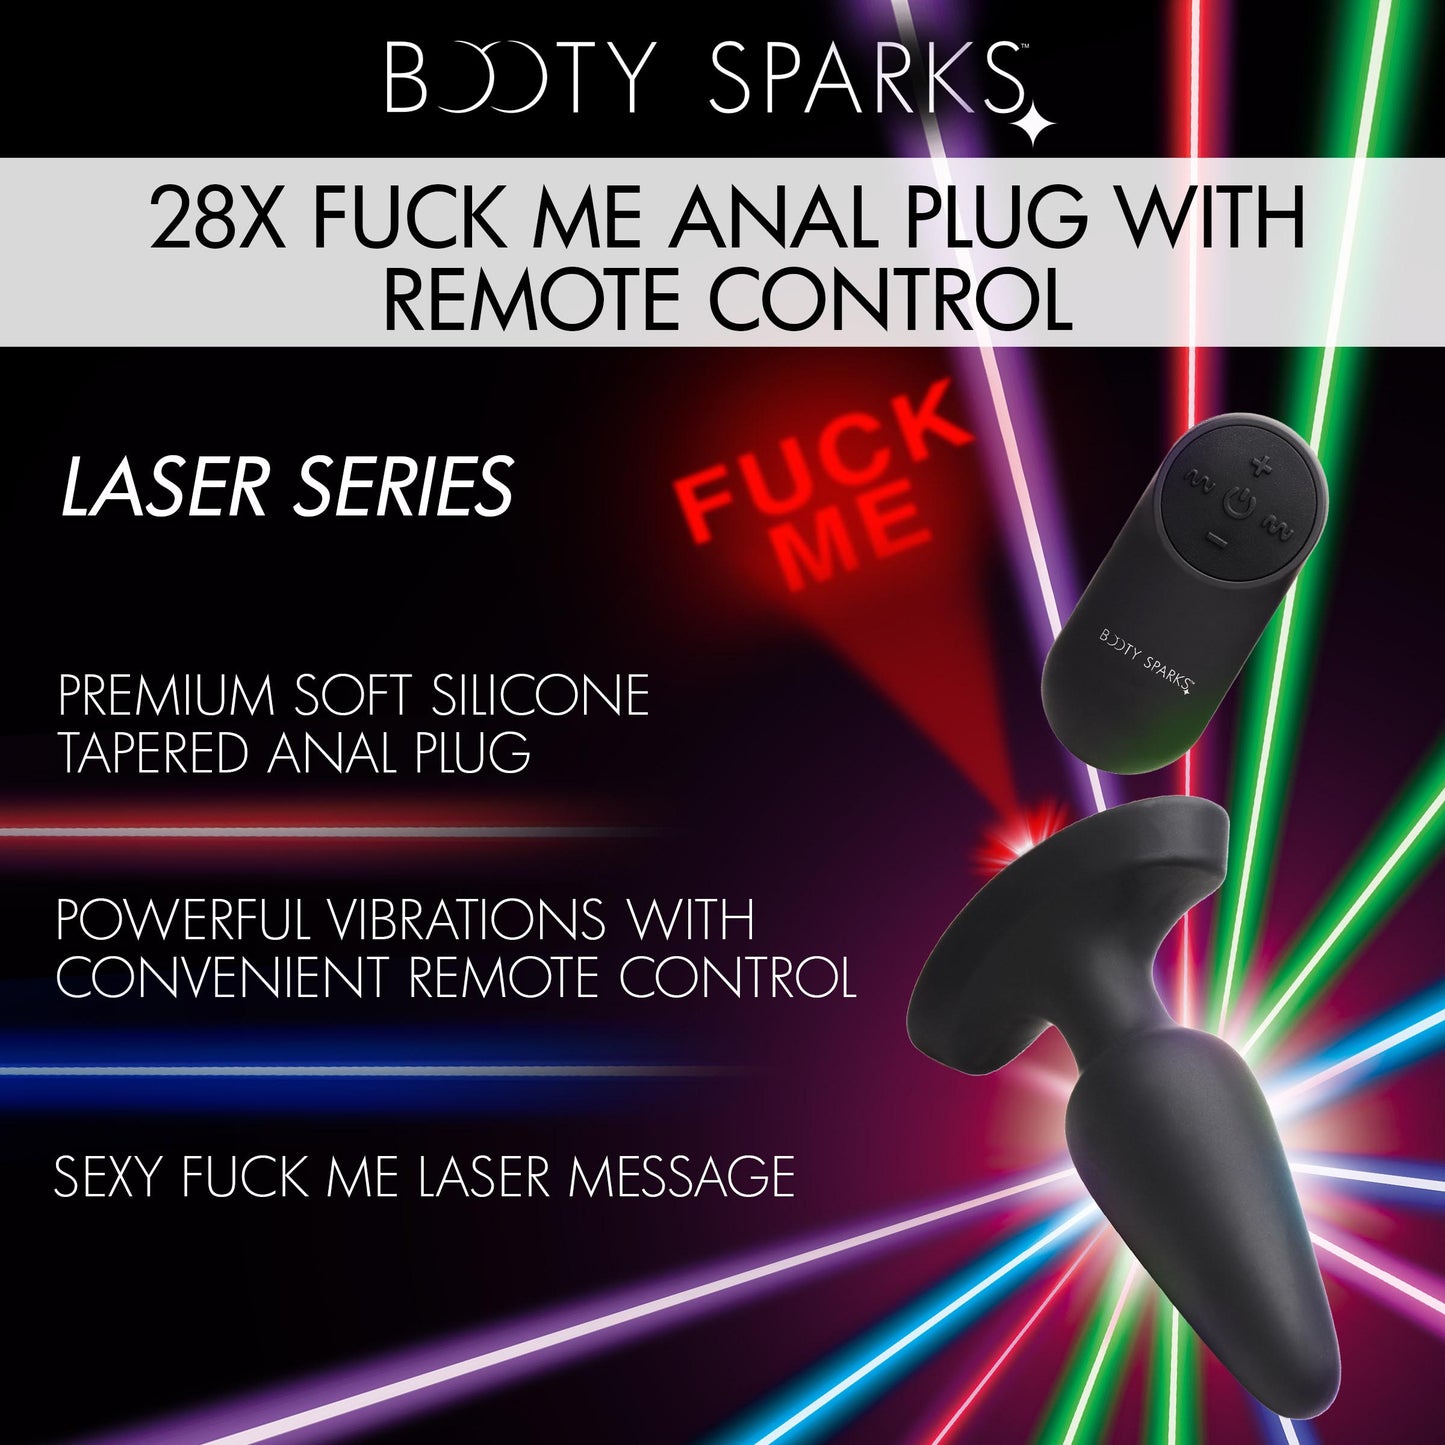 28x Laser Fuck Me Silicone Anal Plug With Remote Control - Large